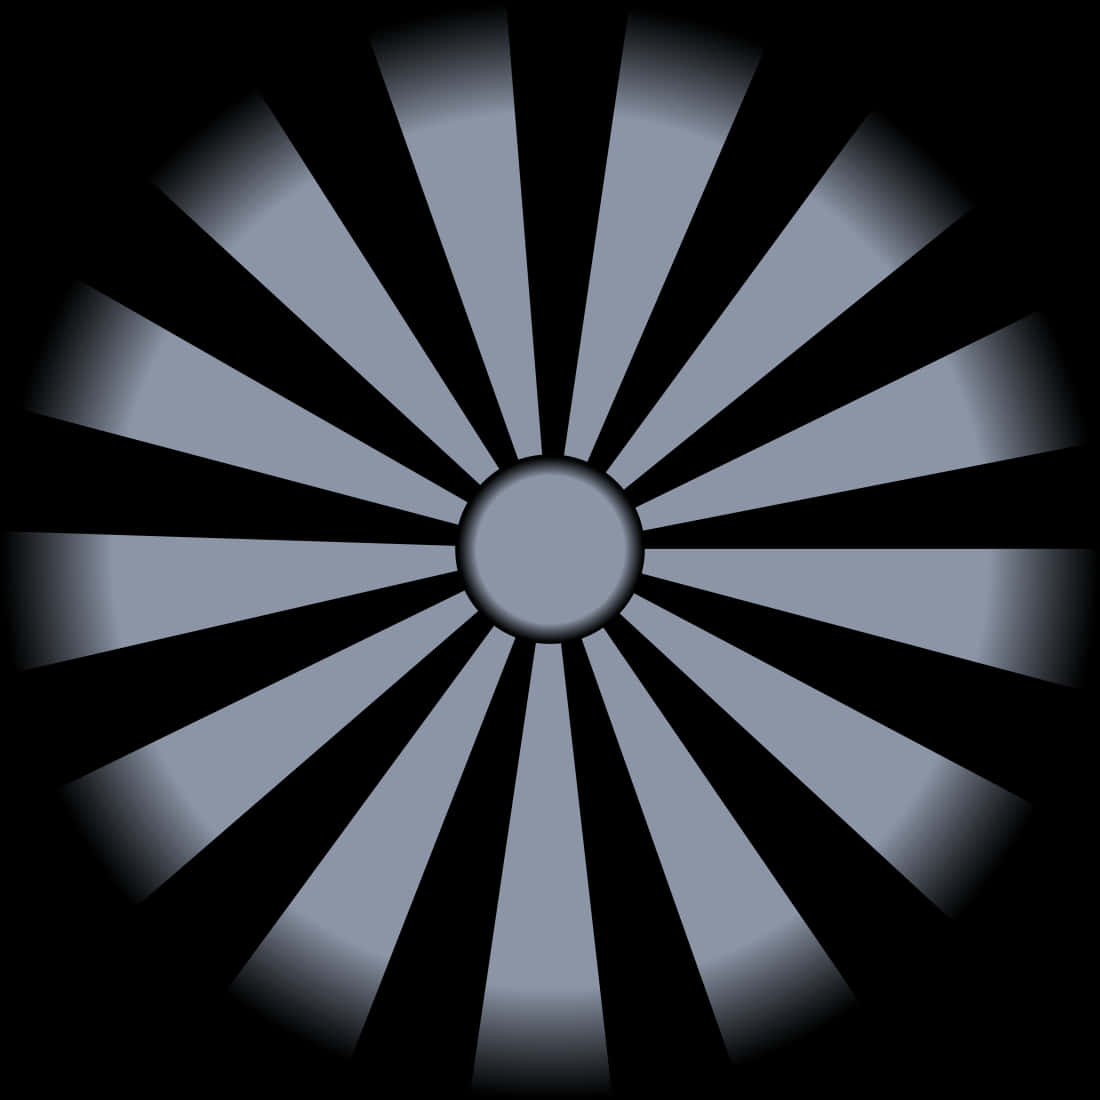 A Circular Black And White Pattern